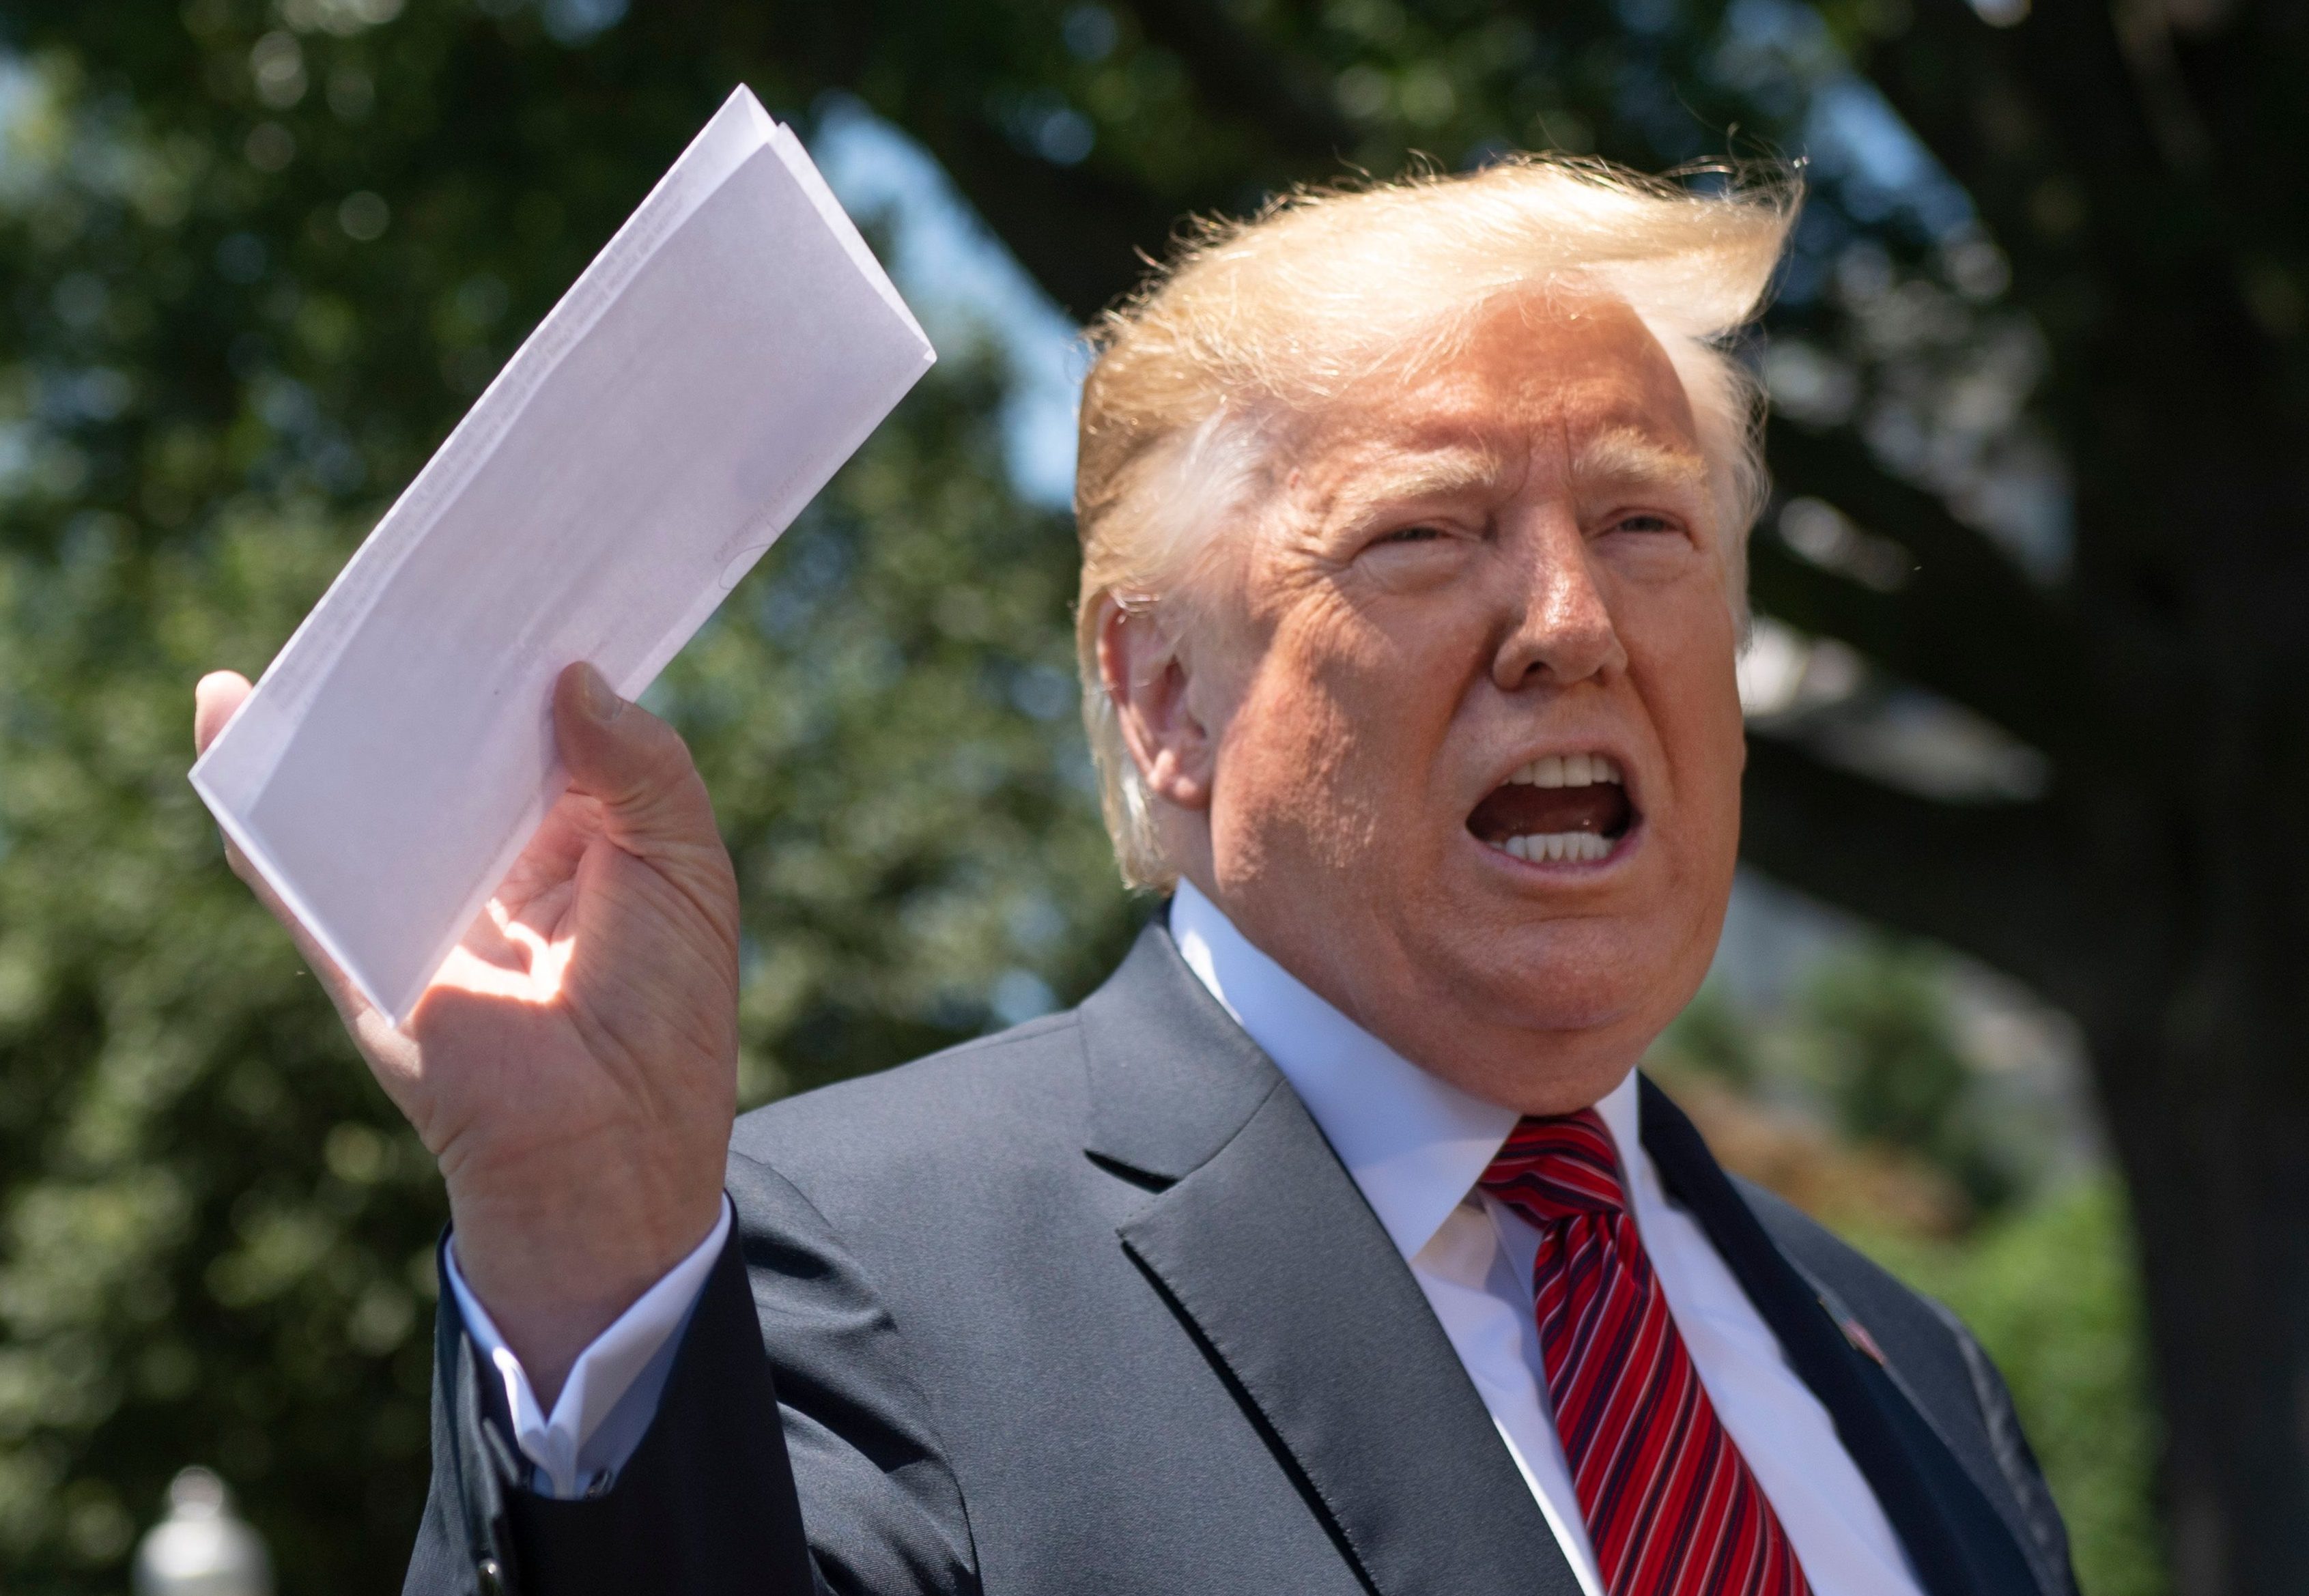 US President Donald Trump holds piece of paper saying its his deal with Mexico as he speaks with reporters at the White House, in Washington, DC, on June 11, 2019. - Trump did not show the paper to reporters. (Photo by Jim WATSON / AFP) (Photo credit should read JIM WATSON/AFP/Getty Images)